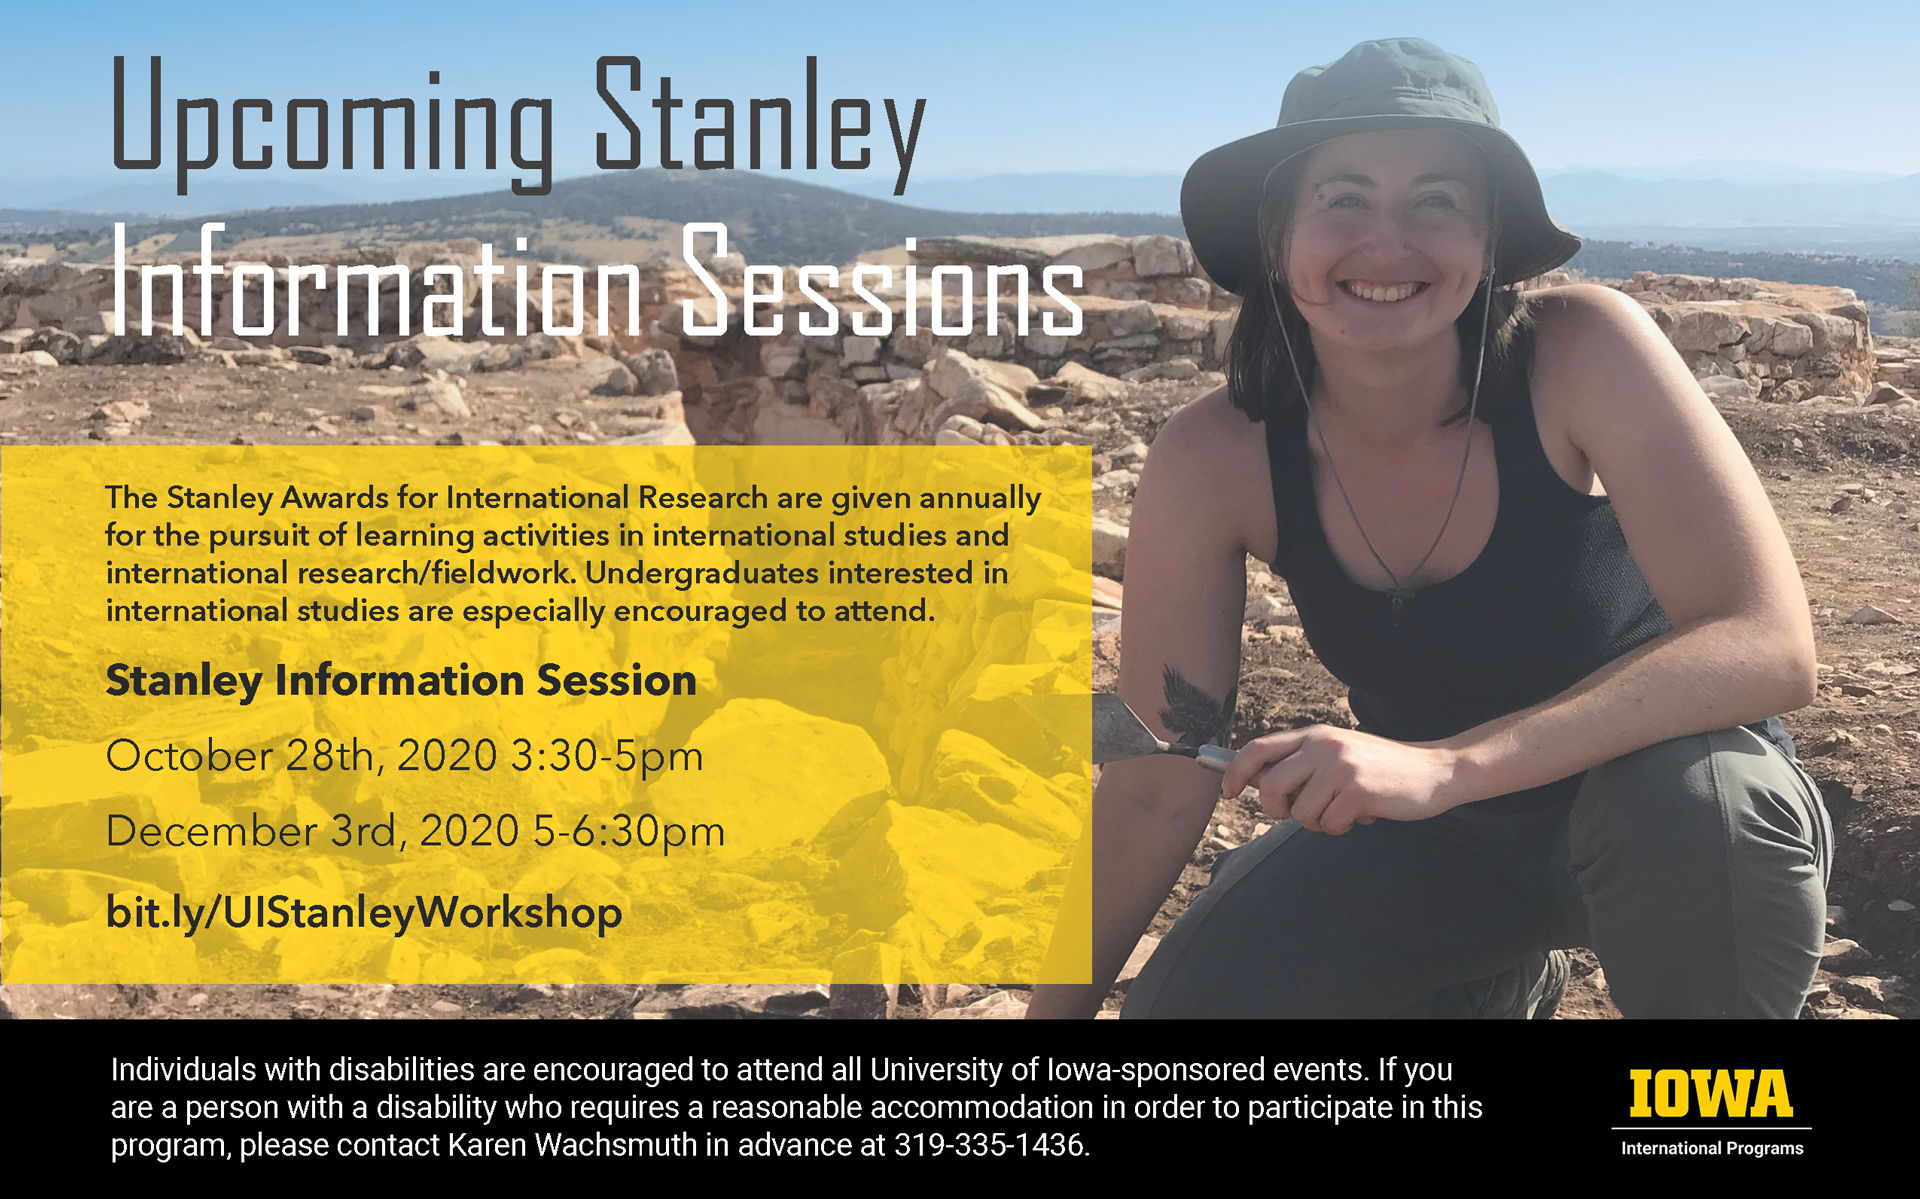 Upcoming Stanley Information Session. The Stanley Awards for International Research are given annually for the pursuit of learning activities in international studies and international research/fieldwork. Undergraduates interested in international studies are especially encourages to attend. Upcoming information sessions are October 28th, 2020 from 3:30pm to 5pm and December 3rd, 2020 from 5pm to 6:30pm. Register to attend bit.ly/UIStanleyWorkshop